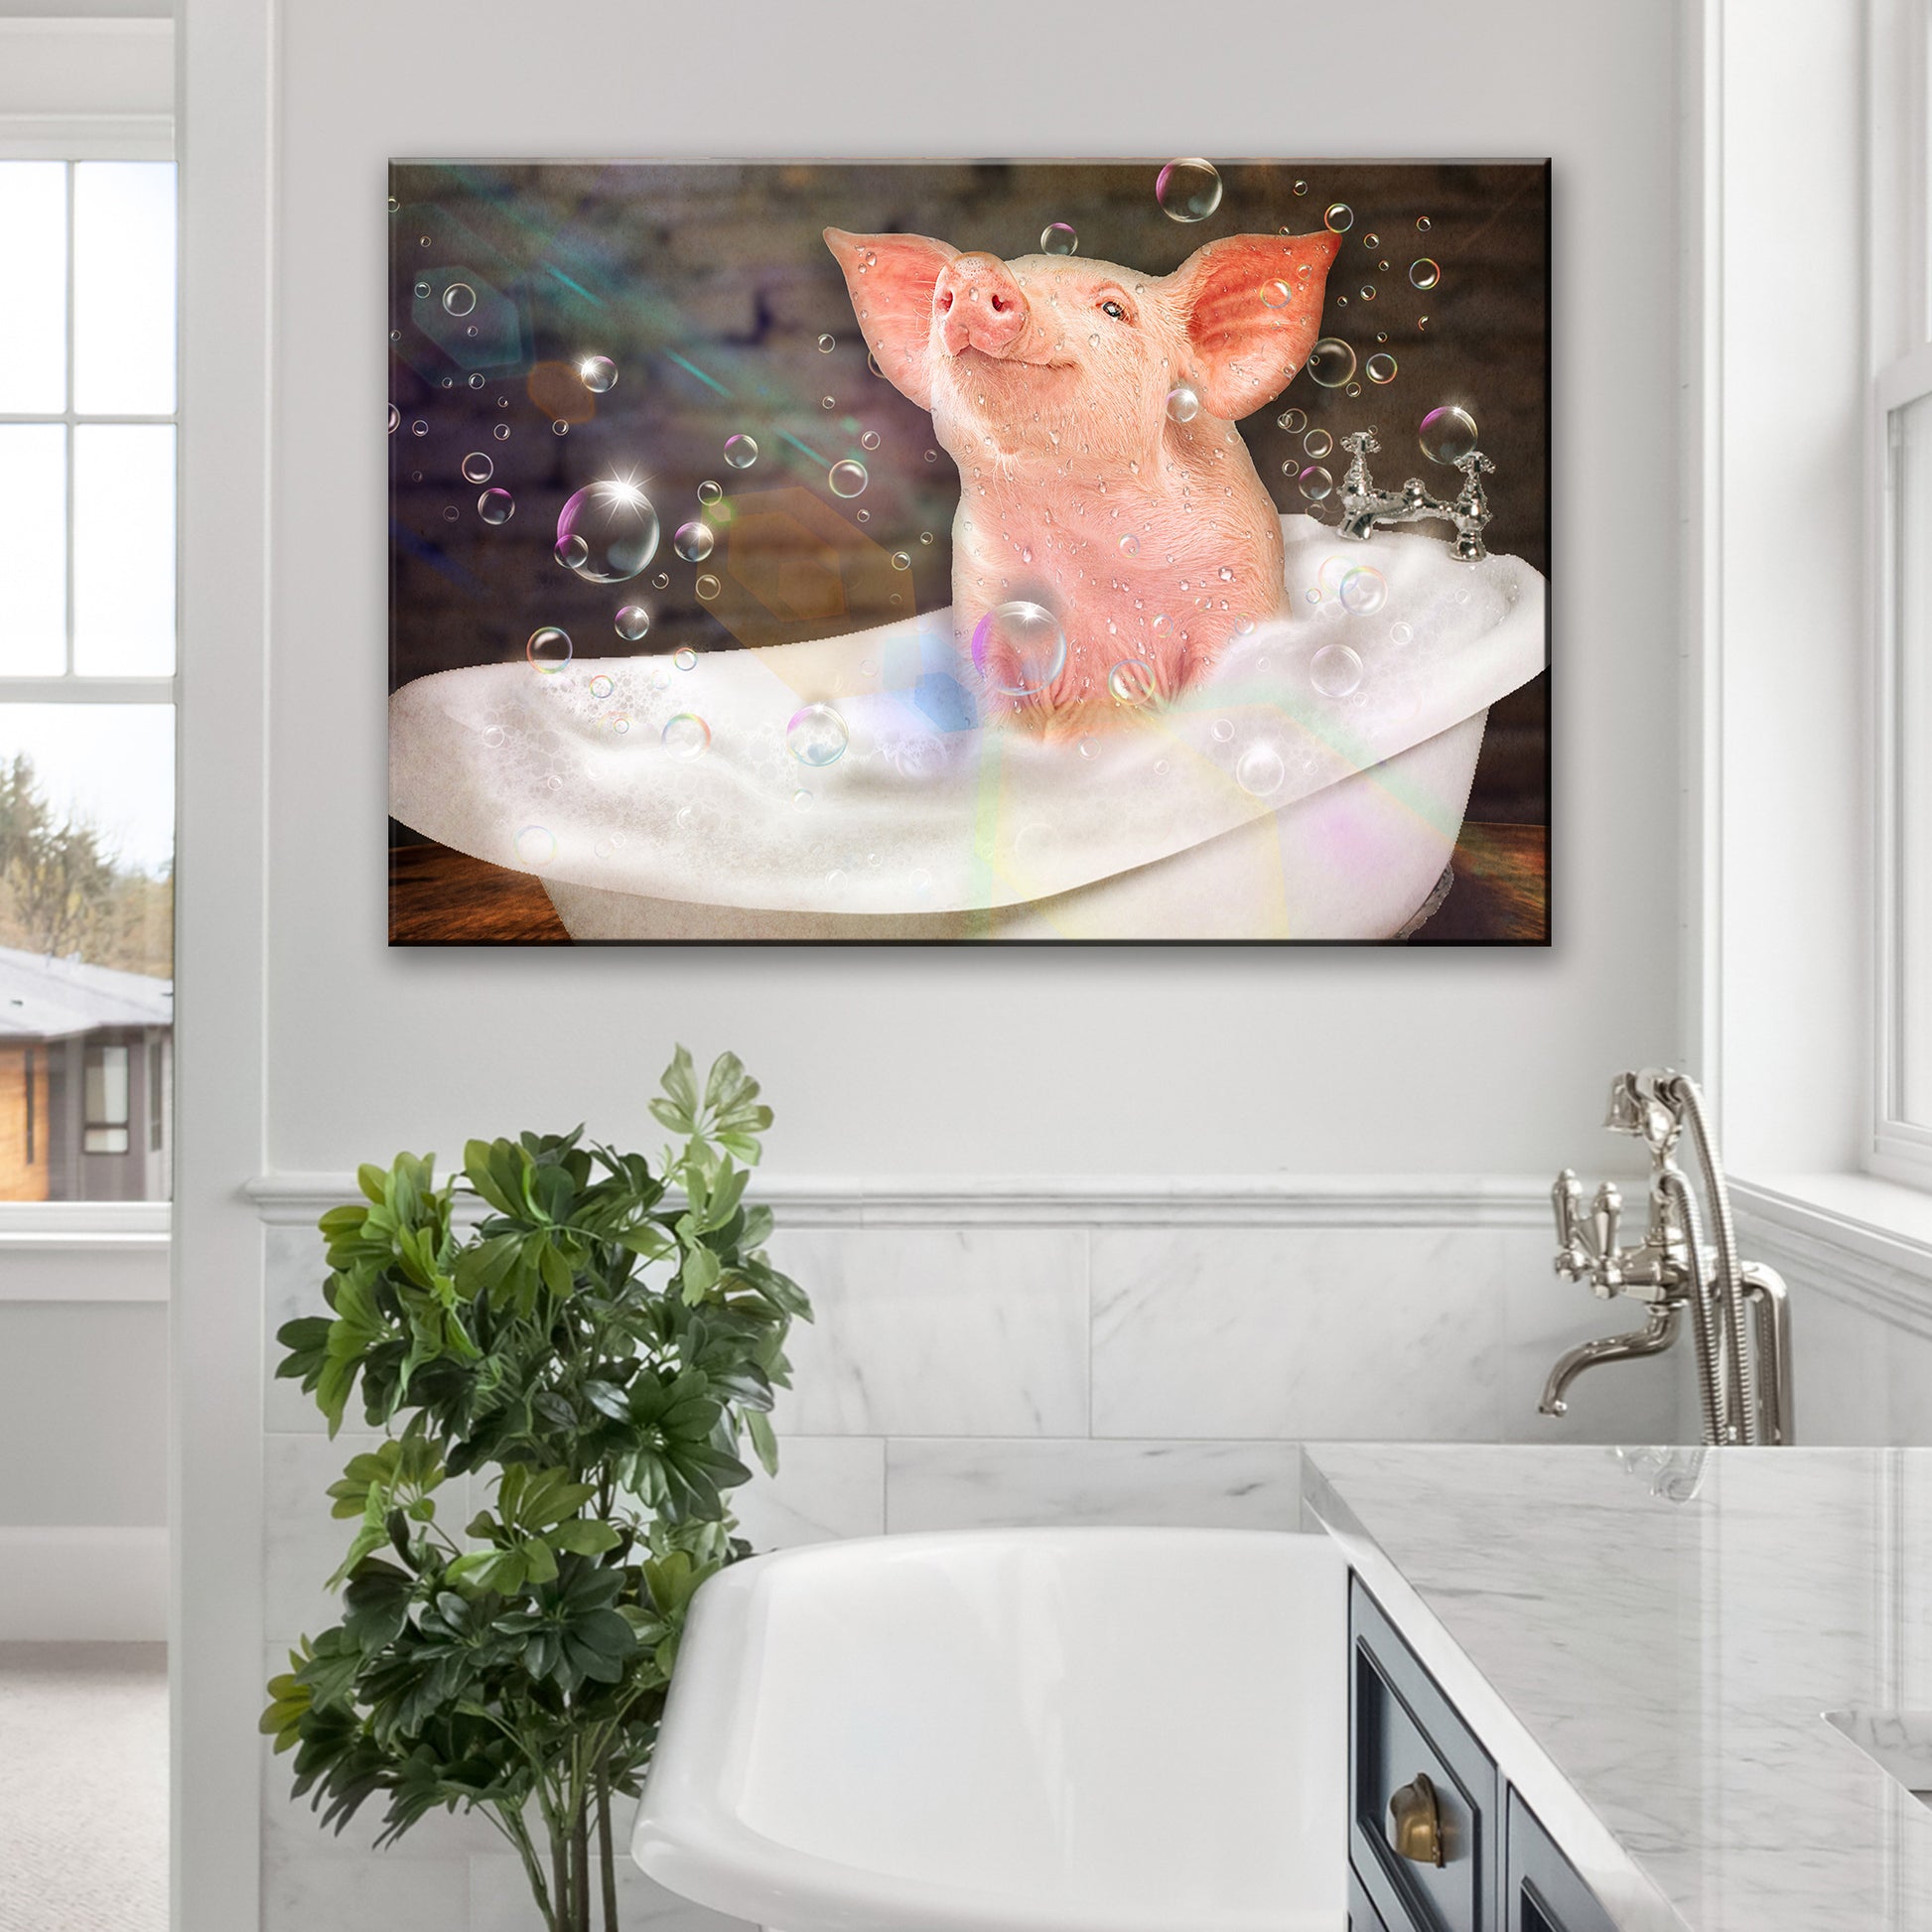 Bubble Bath Pig In Tub Canvas Wall Art Style 2 - Image by Tailored Canvases